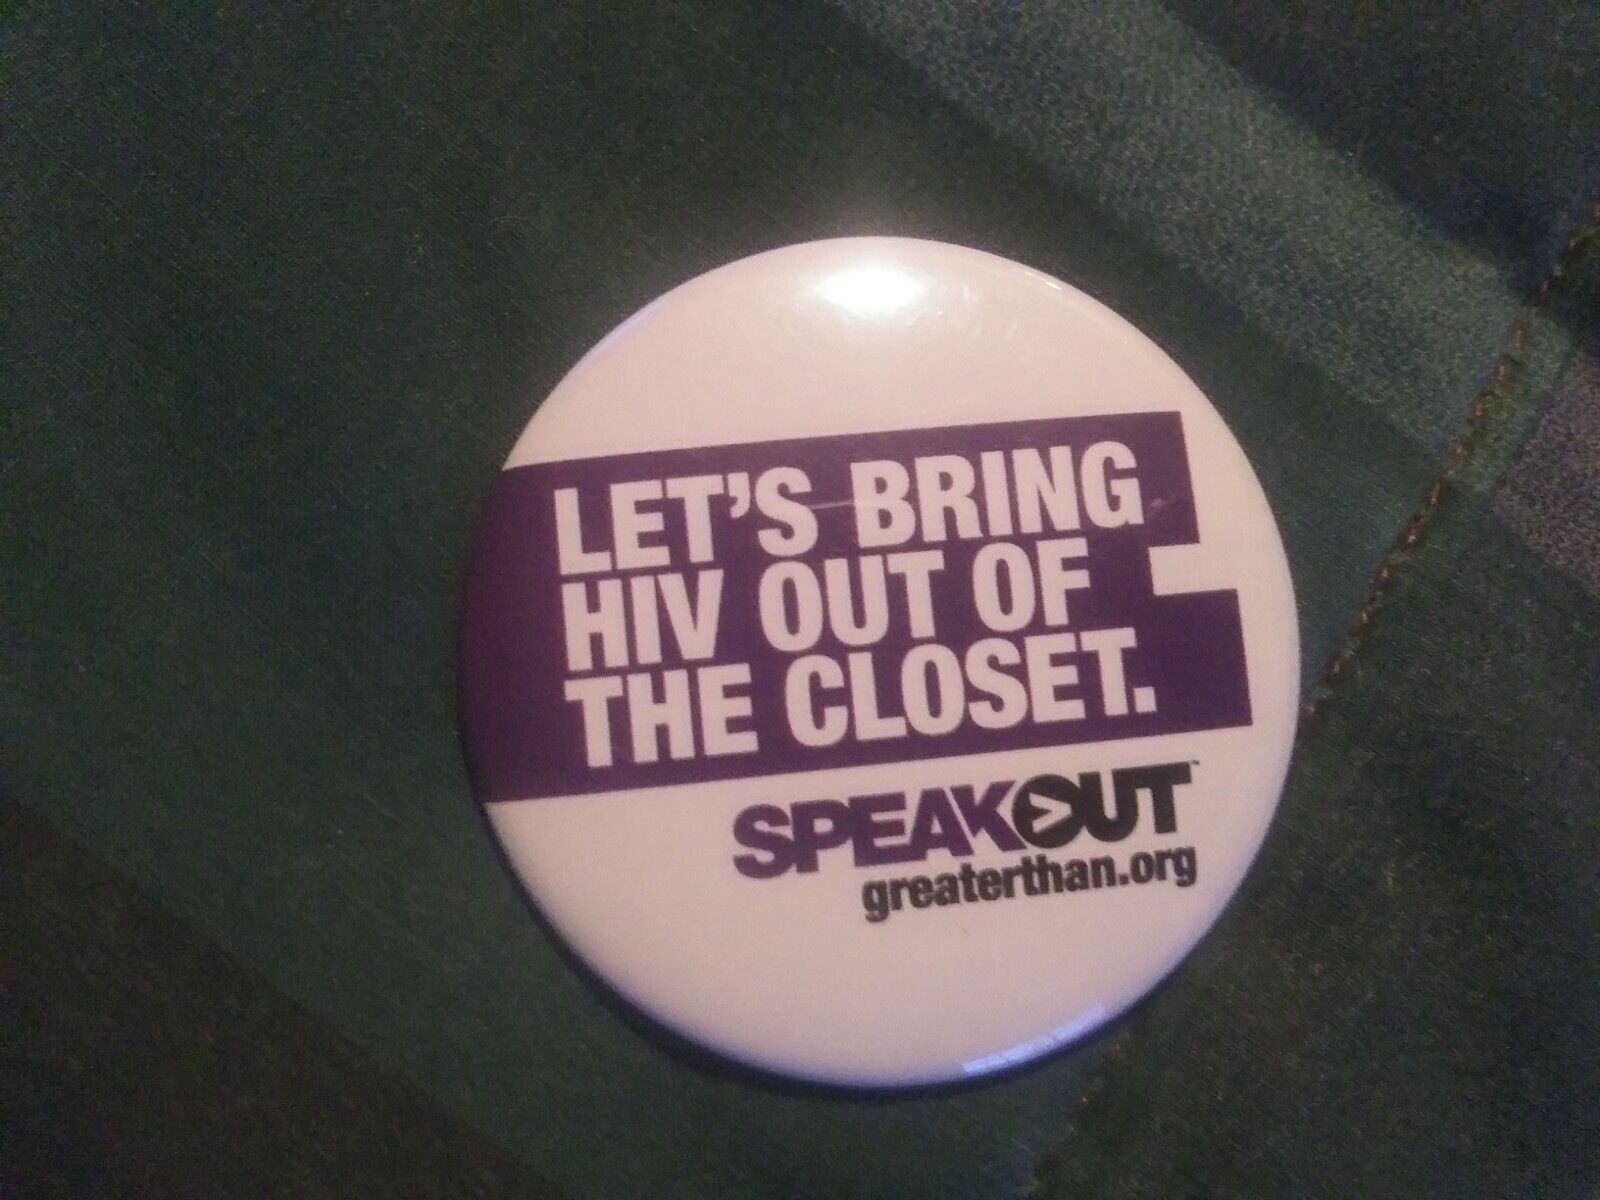 Hiv aids speak out speakout Pin Back Button 